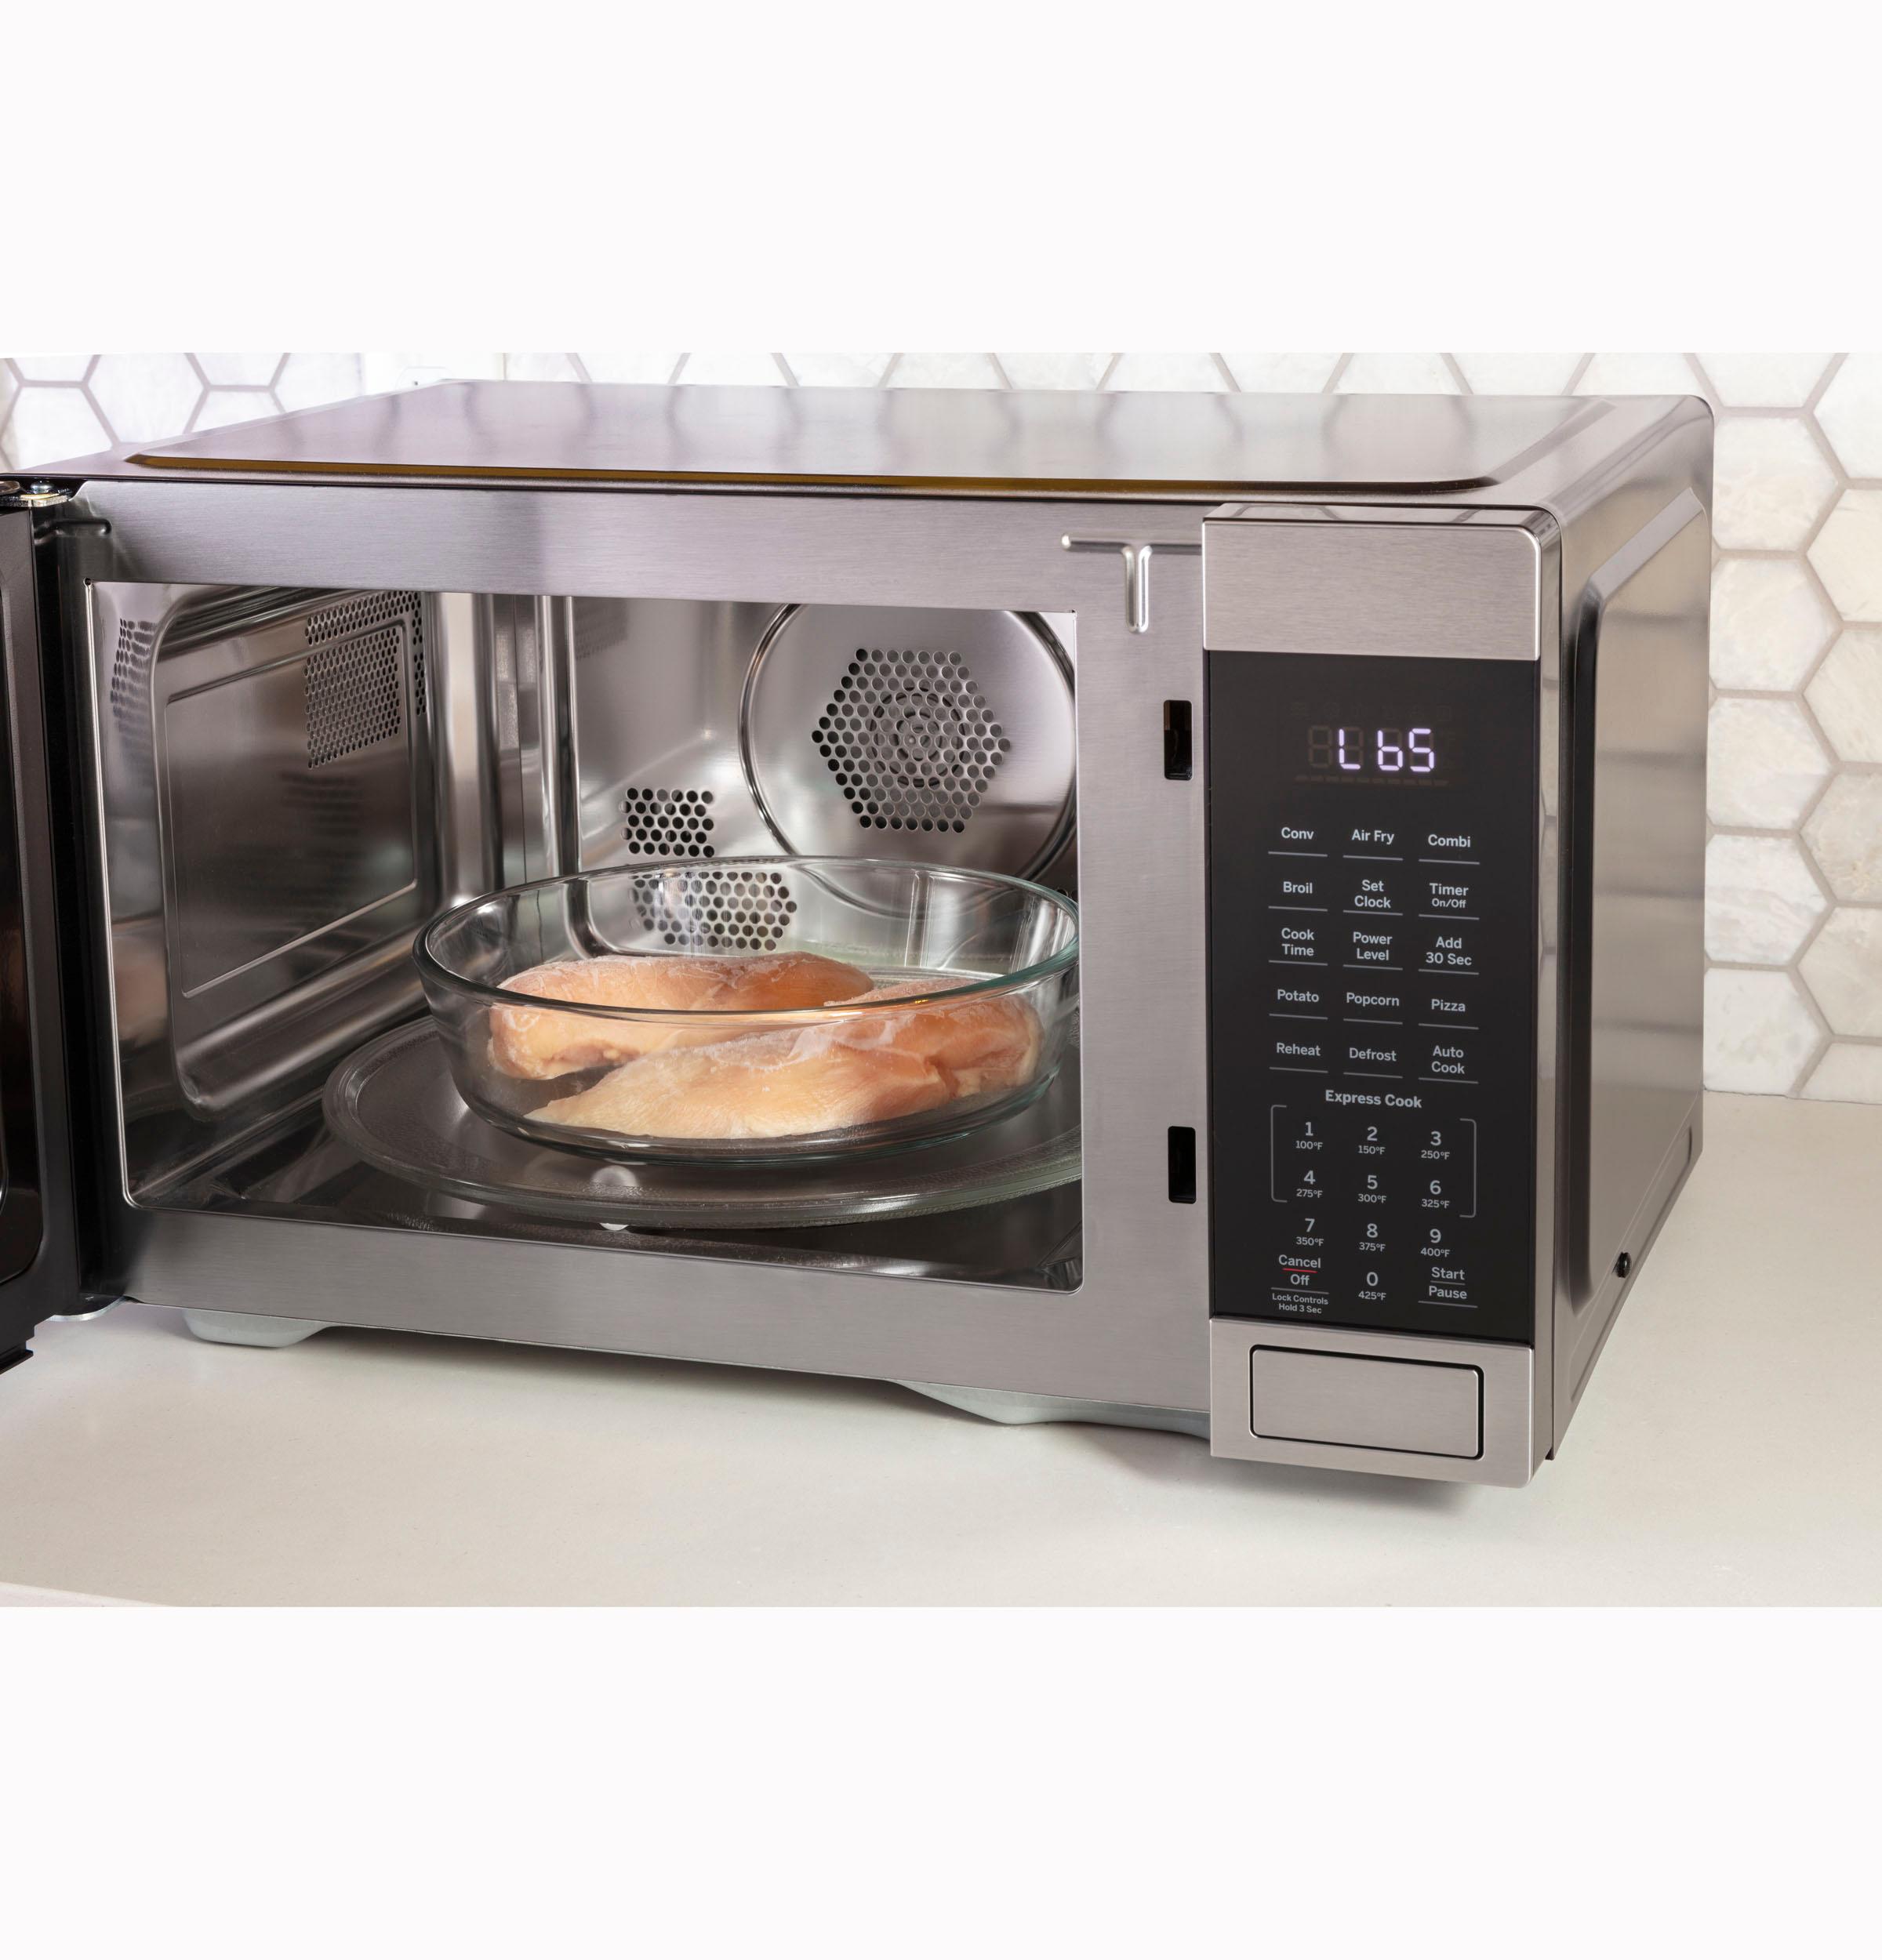 GE® 1.0 Cu. Ft. Capacity Countertop Convection Microwave Oven with Air Fry